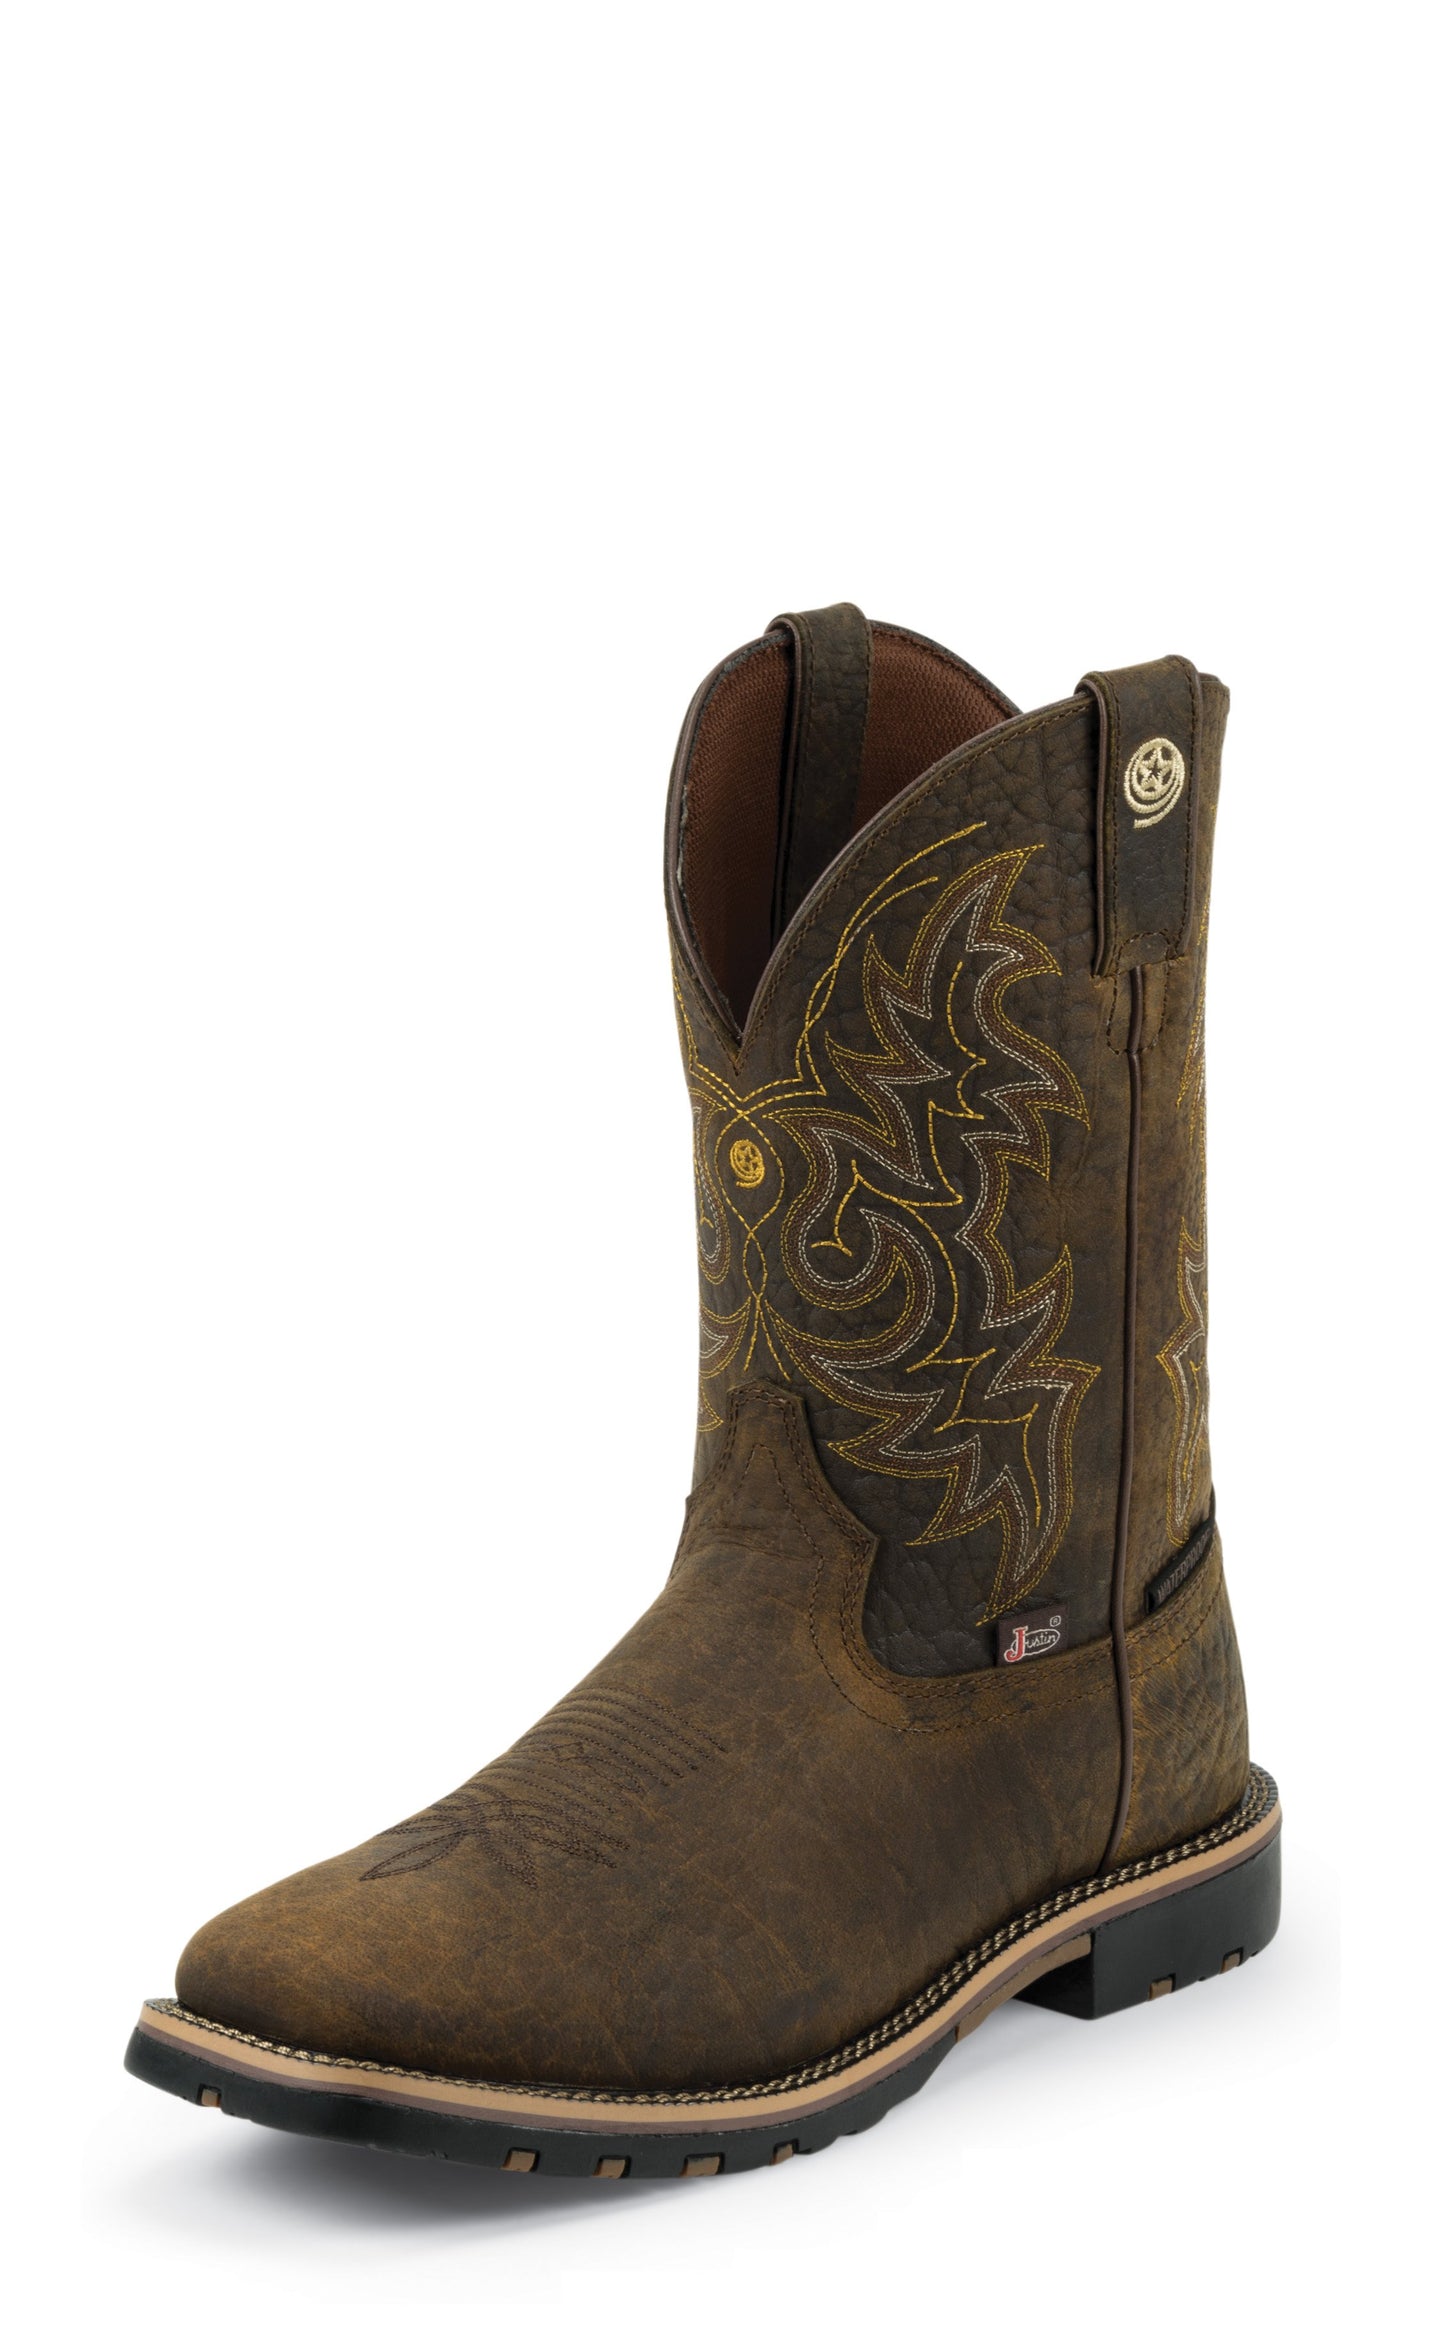 Justin Men's Boots - George Strait Fireman H2O - Weathered Bark Crazy Horse GS9050